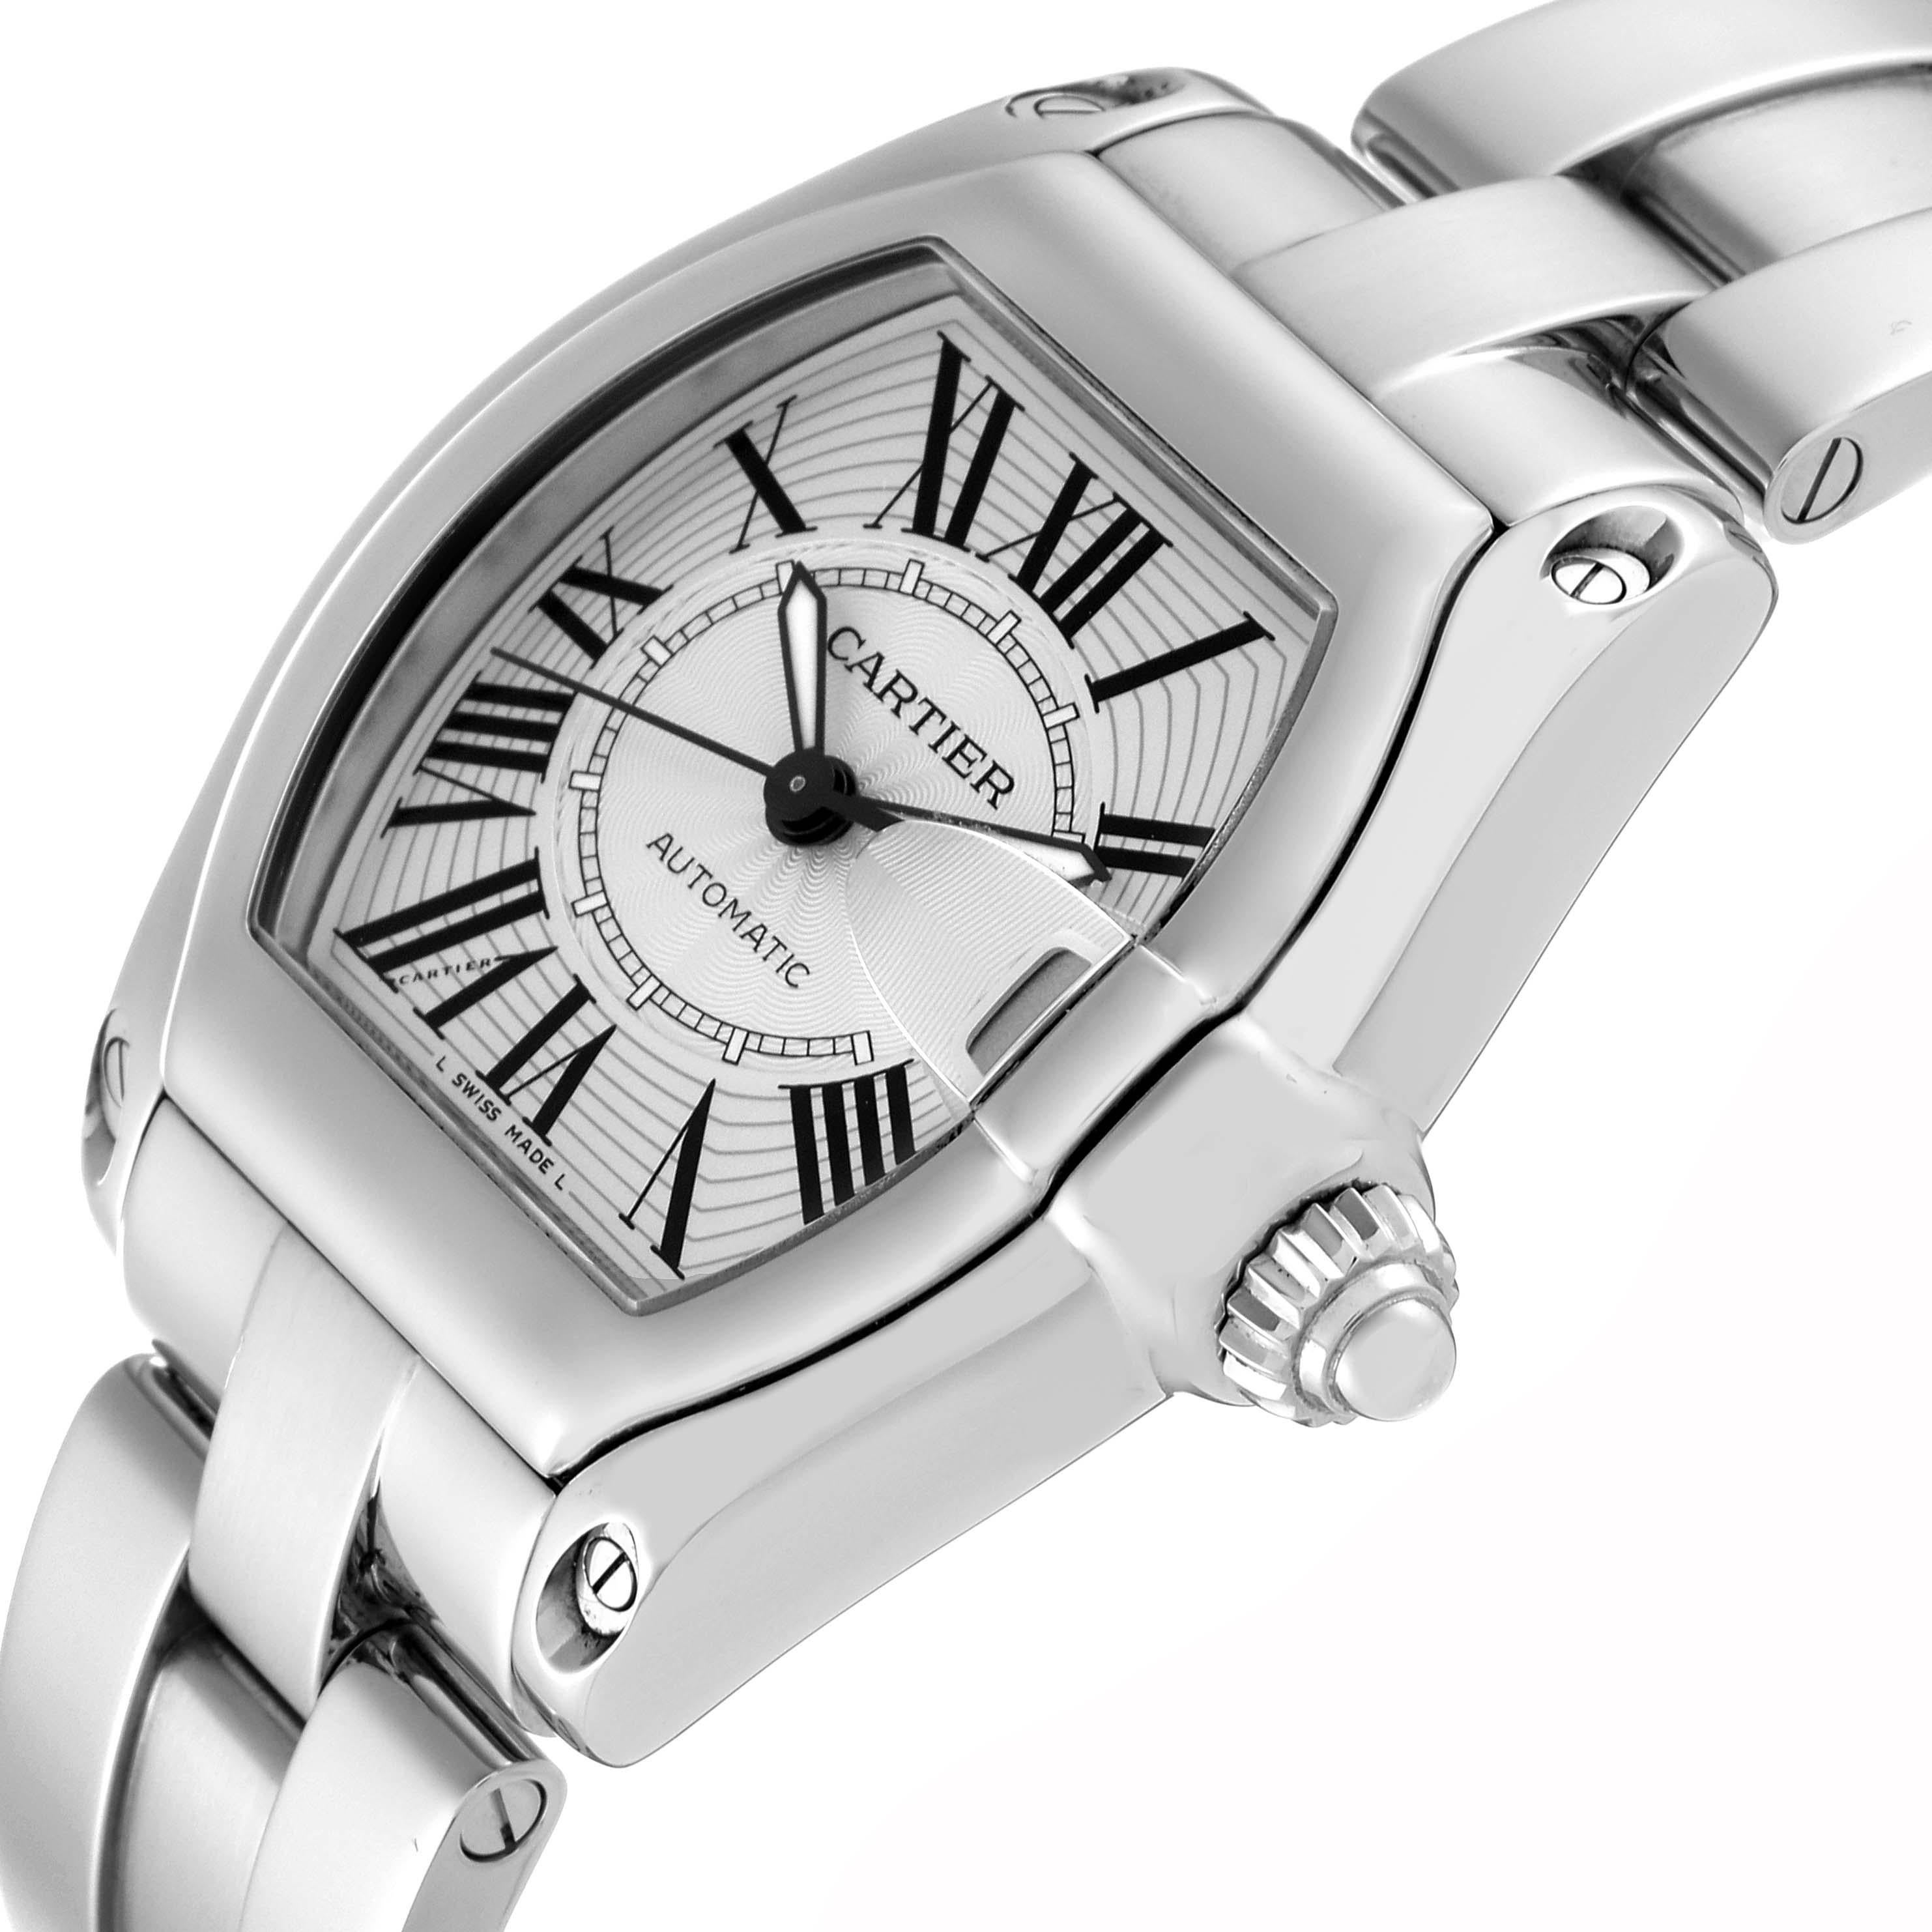 Cartier Roadster Large Silver Dial Steel Mens Watch W62025V3 In Excellent Condition For Sale In Atlanta, GA